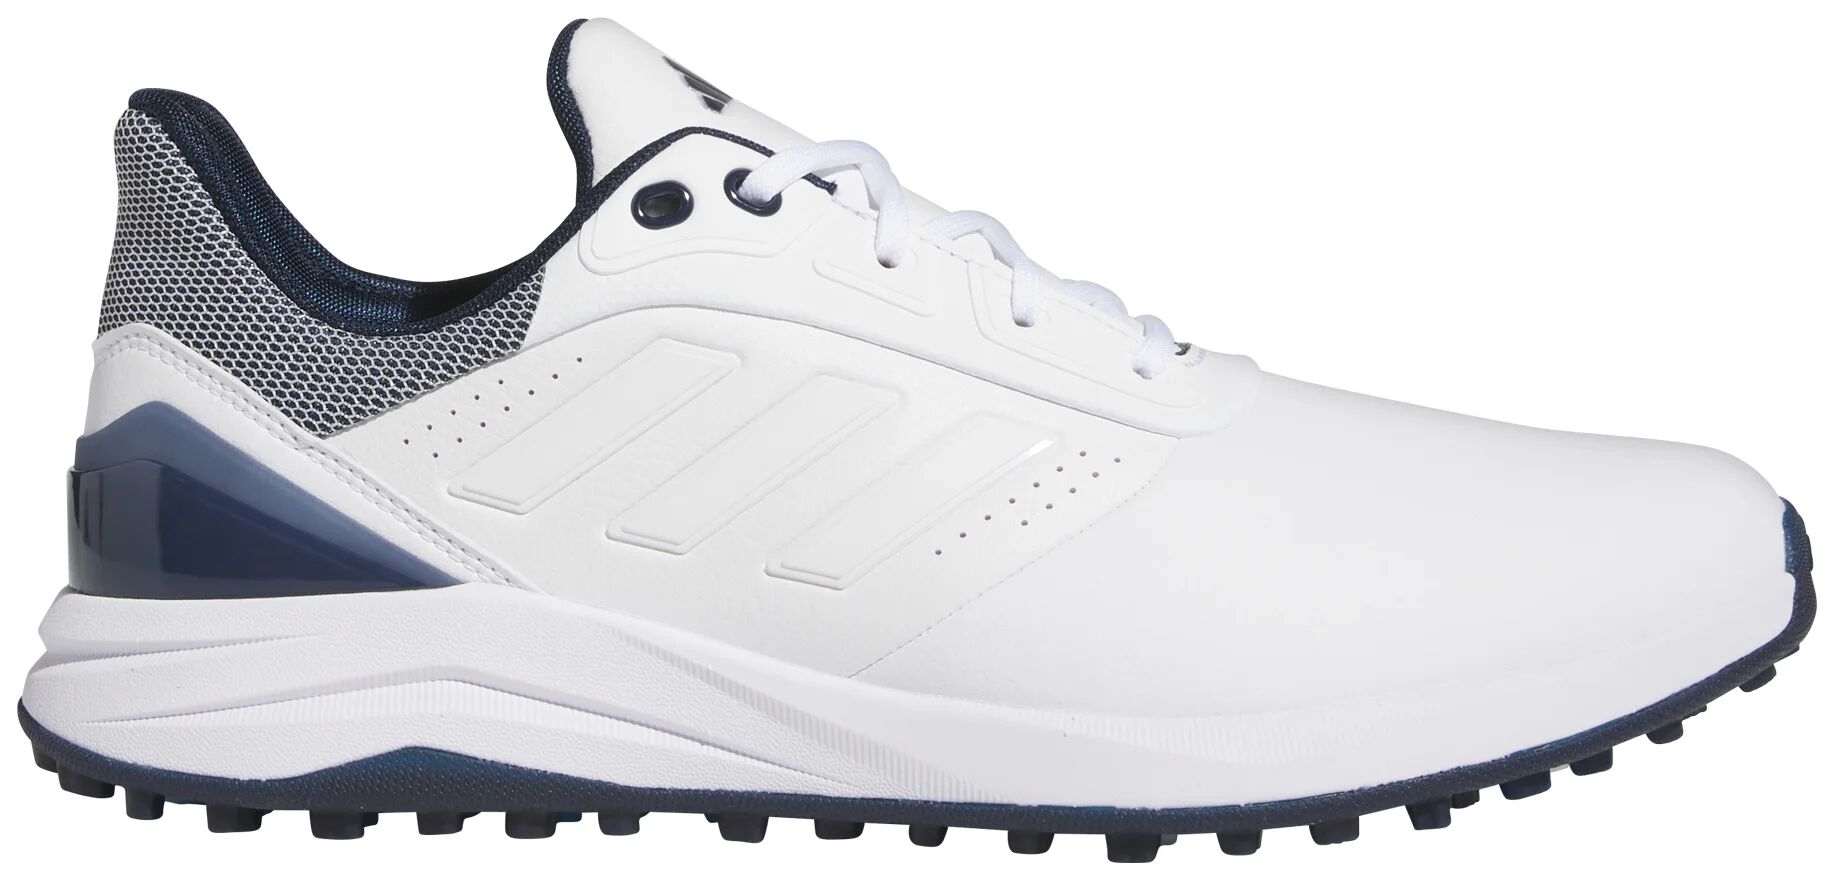 adidas Solarmotion Spikeless 24 Golf Shoes - Cloud White/Cloud White/Preloved Ink - 10.5 - MEDIUM